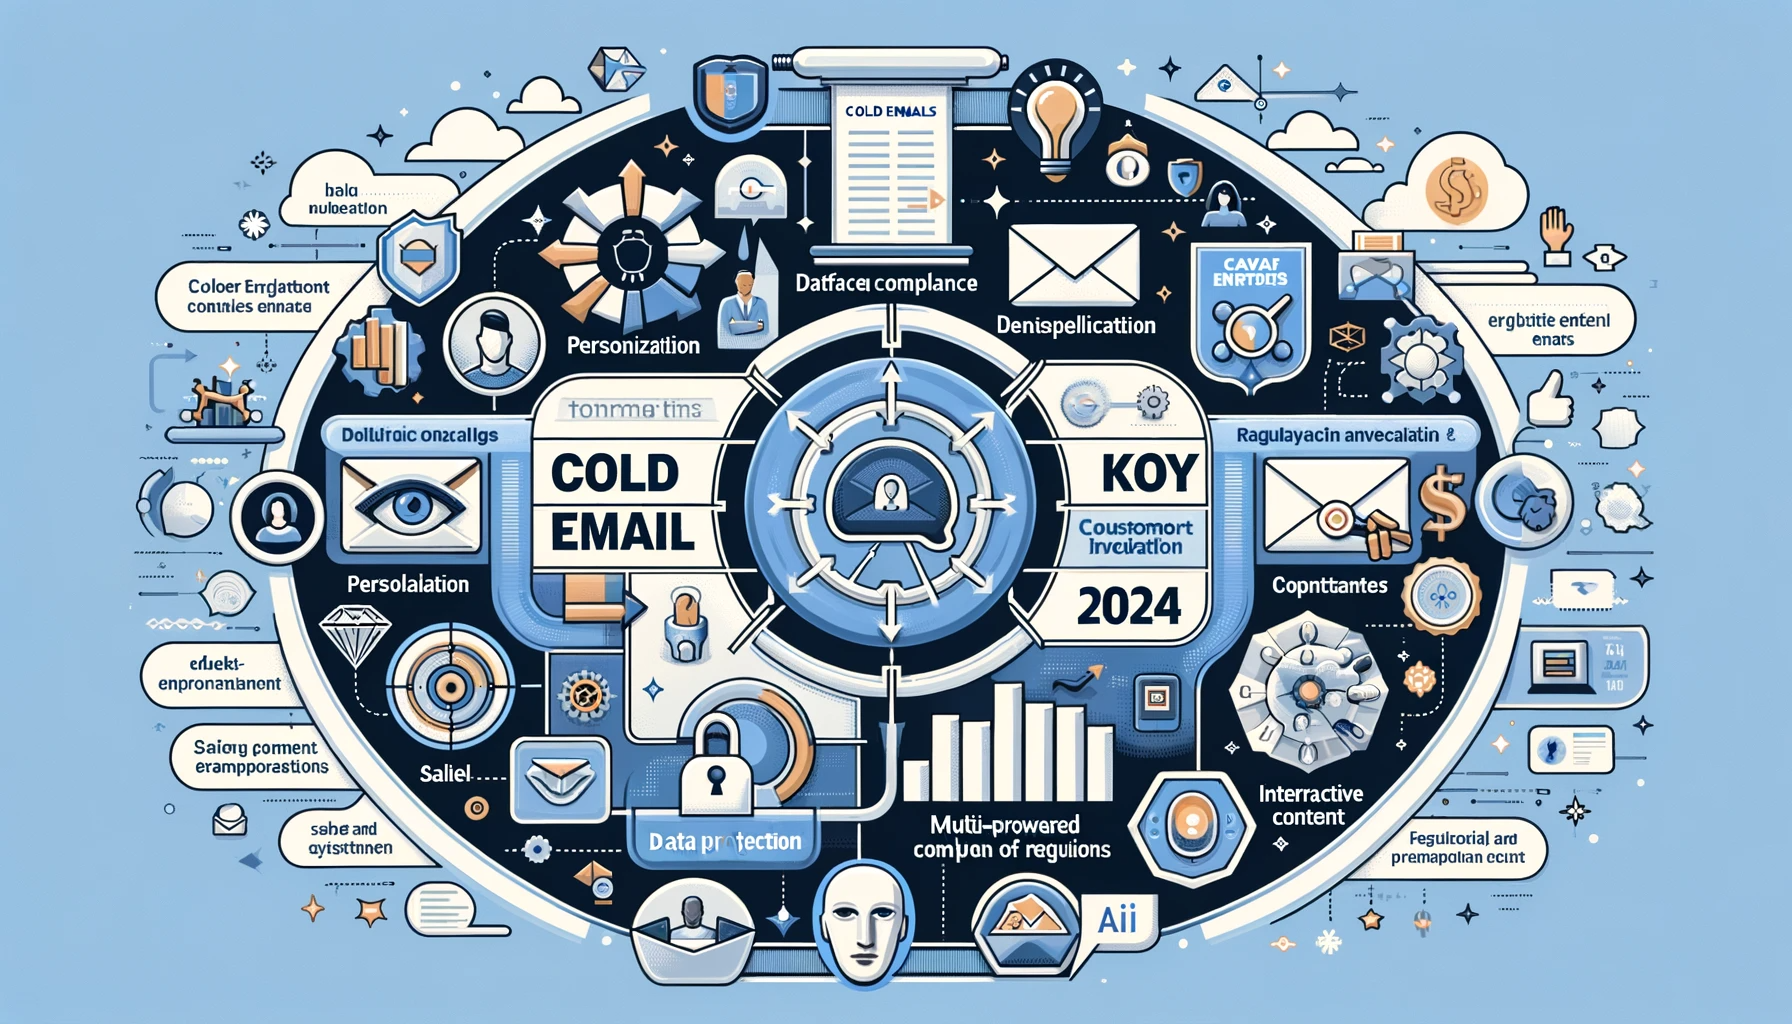 The Future of Cold Email in 2024: What Changes and What Remains